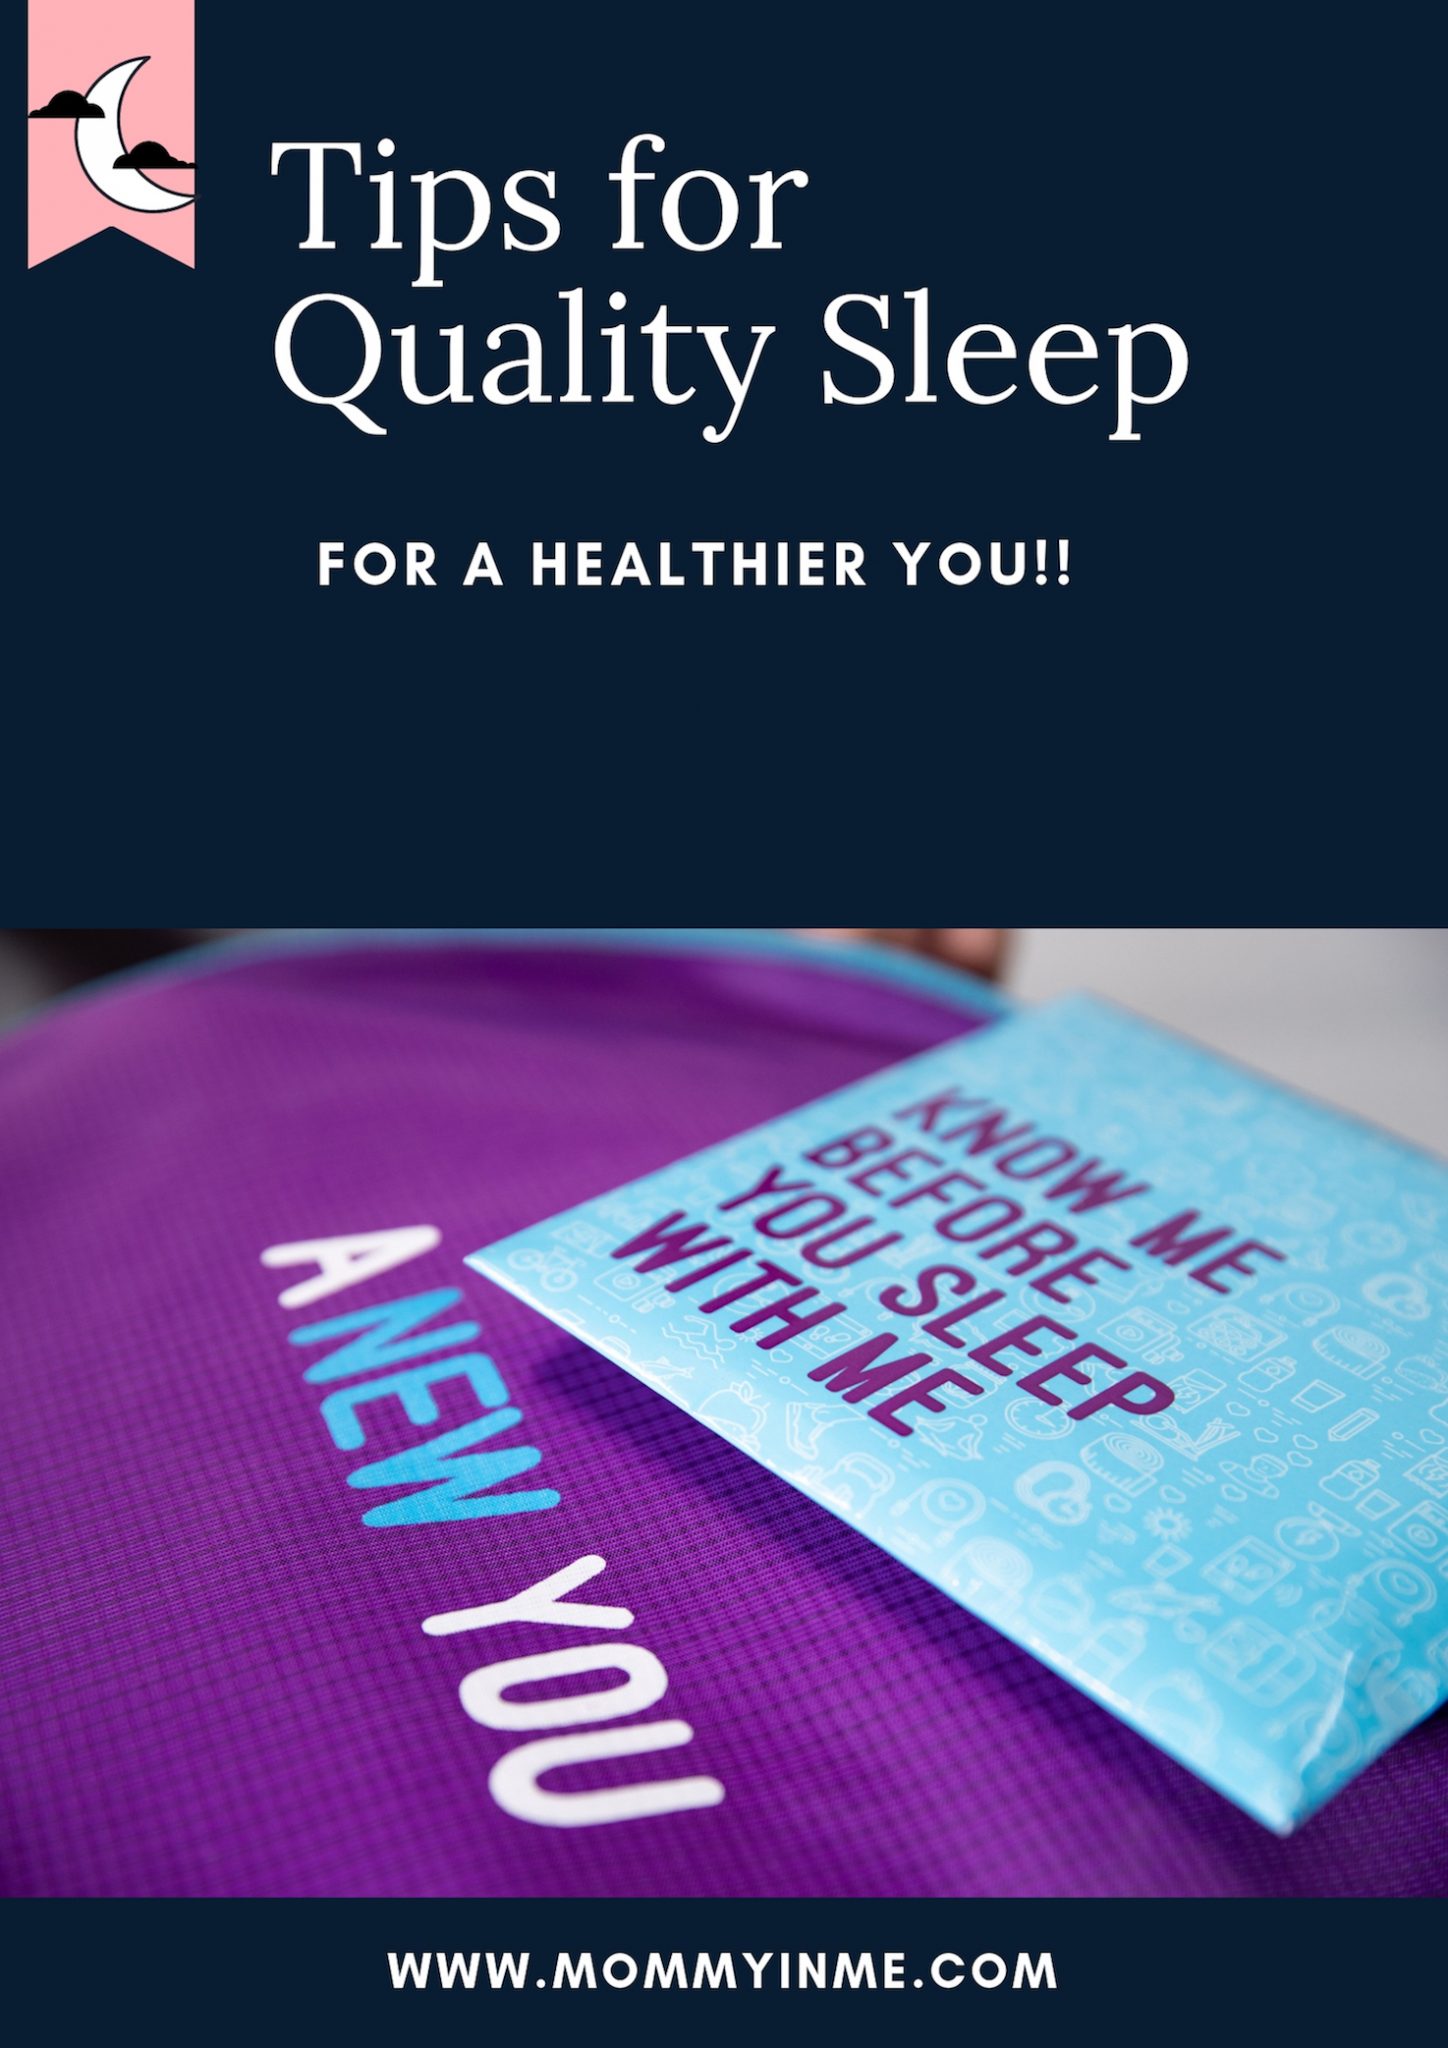 Did you know what is impacting your sleep quality or what is hampering you from a good night's sleep? Then continue reading to know some realistic tips to improve your sleep. Mattresses have a very important role, have you tried SleepX mattress and pillows? #sleep #goodnight #sleepquality #mattress #bluelight #healthy #lifestyle